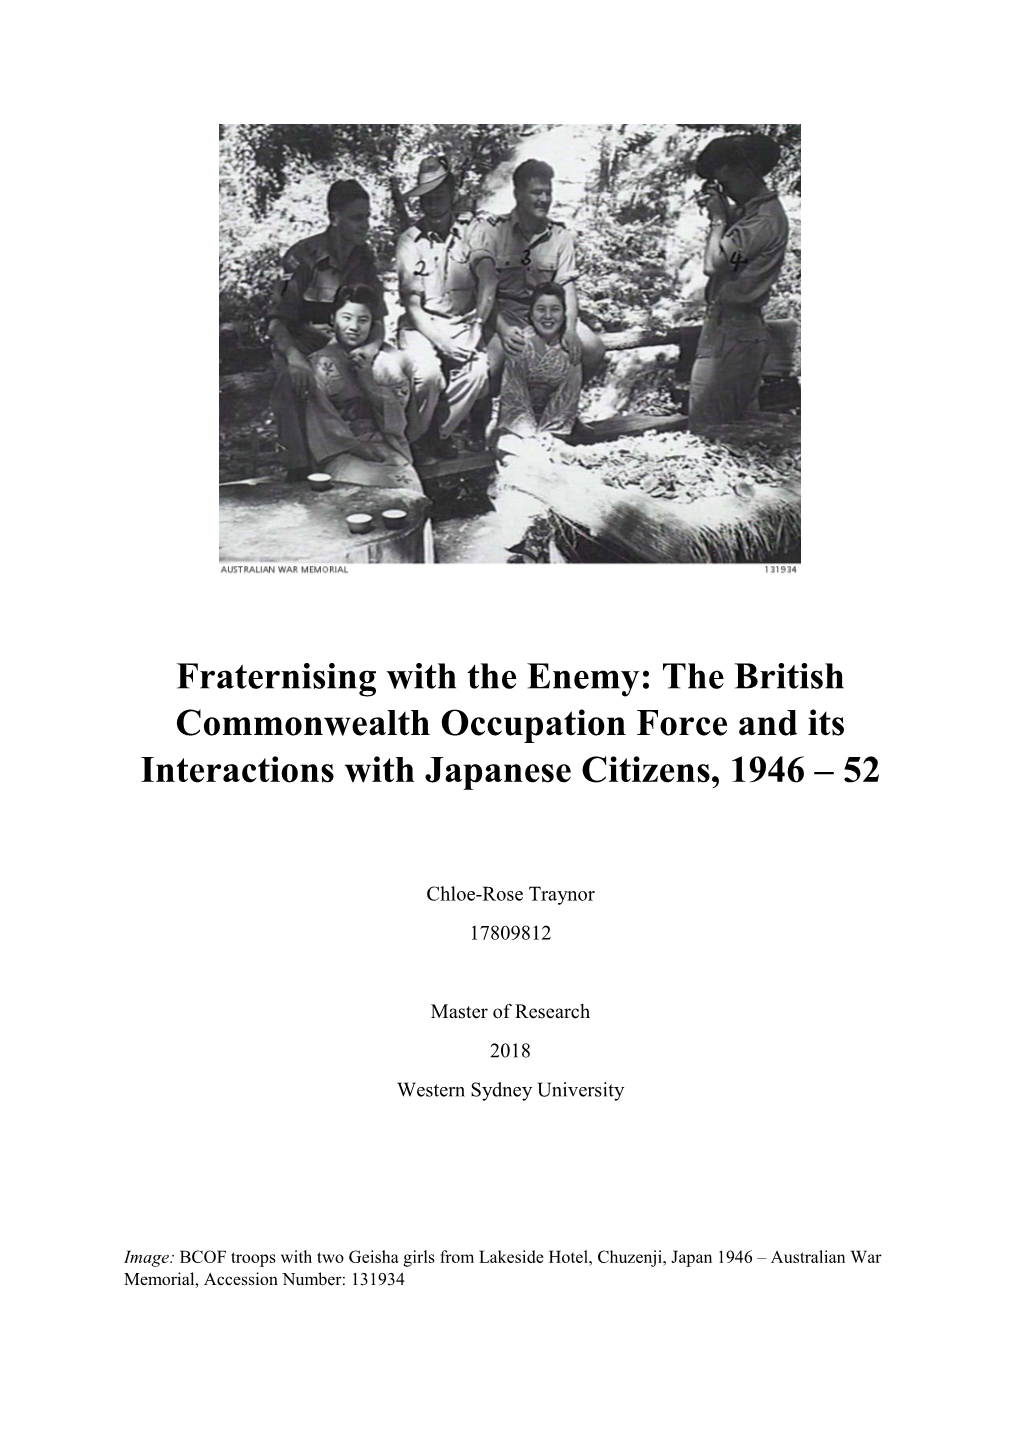 The British Commonwealth Occupation Force and Its Interactions with Japanese Citizens, 1946 – 52